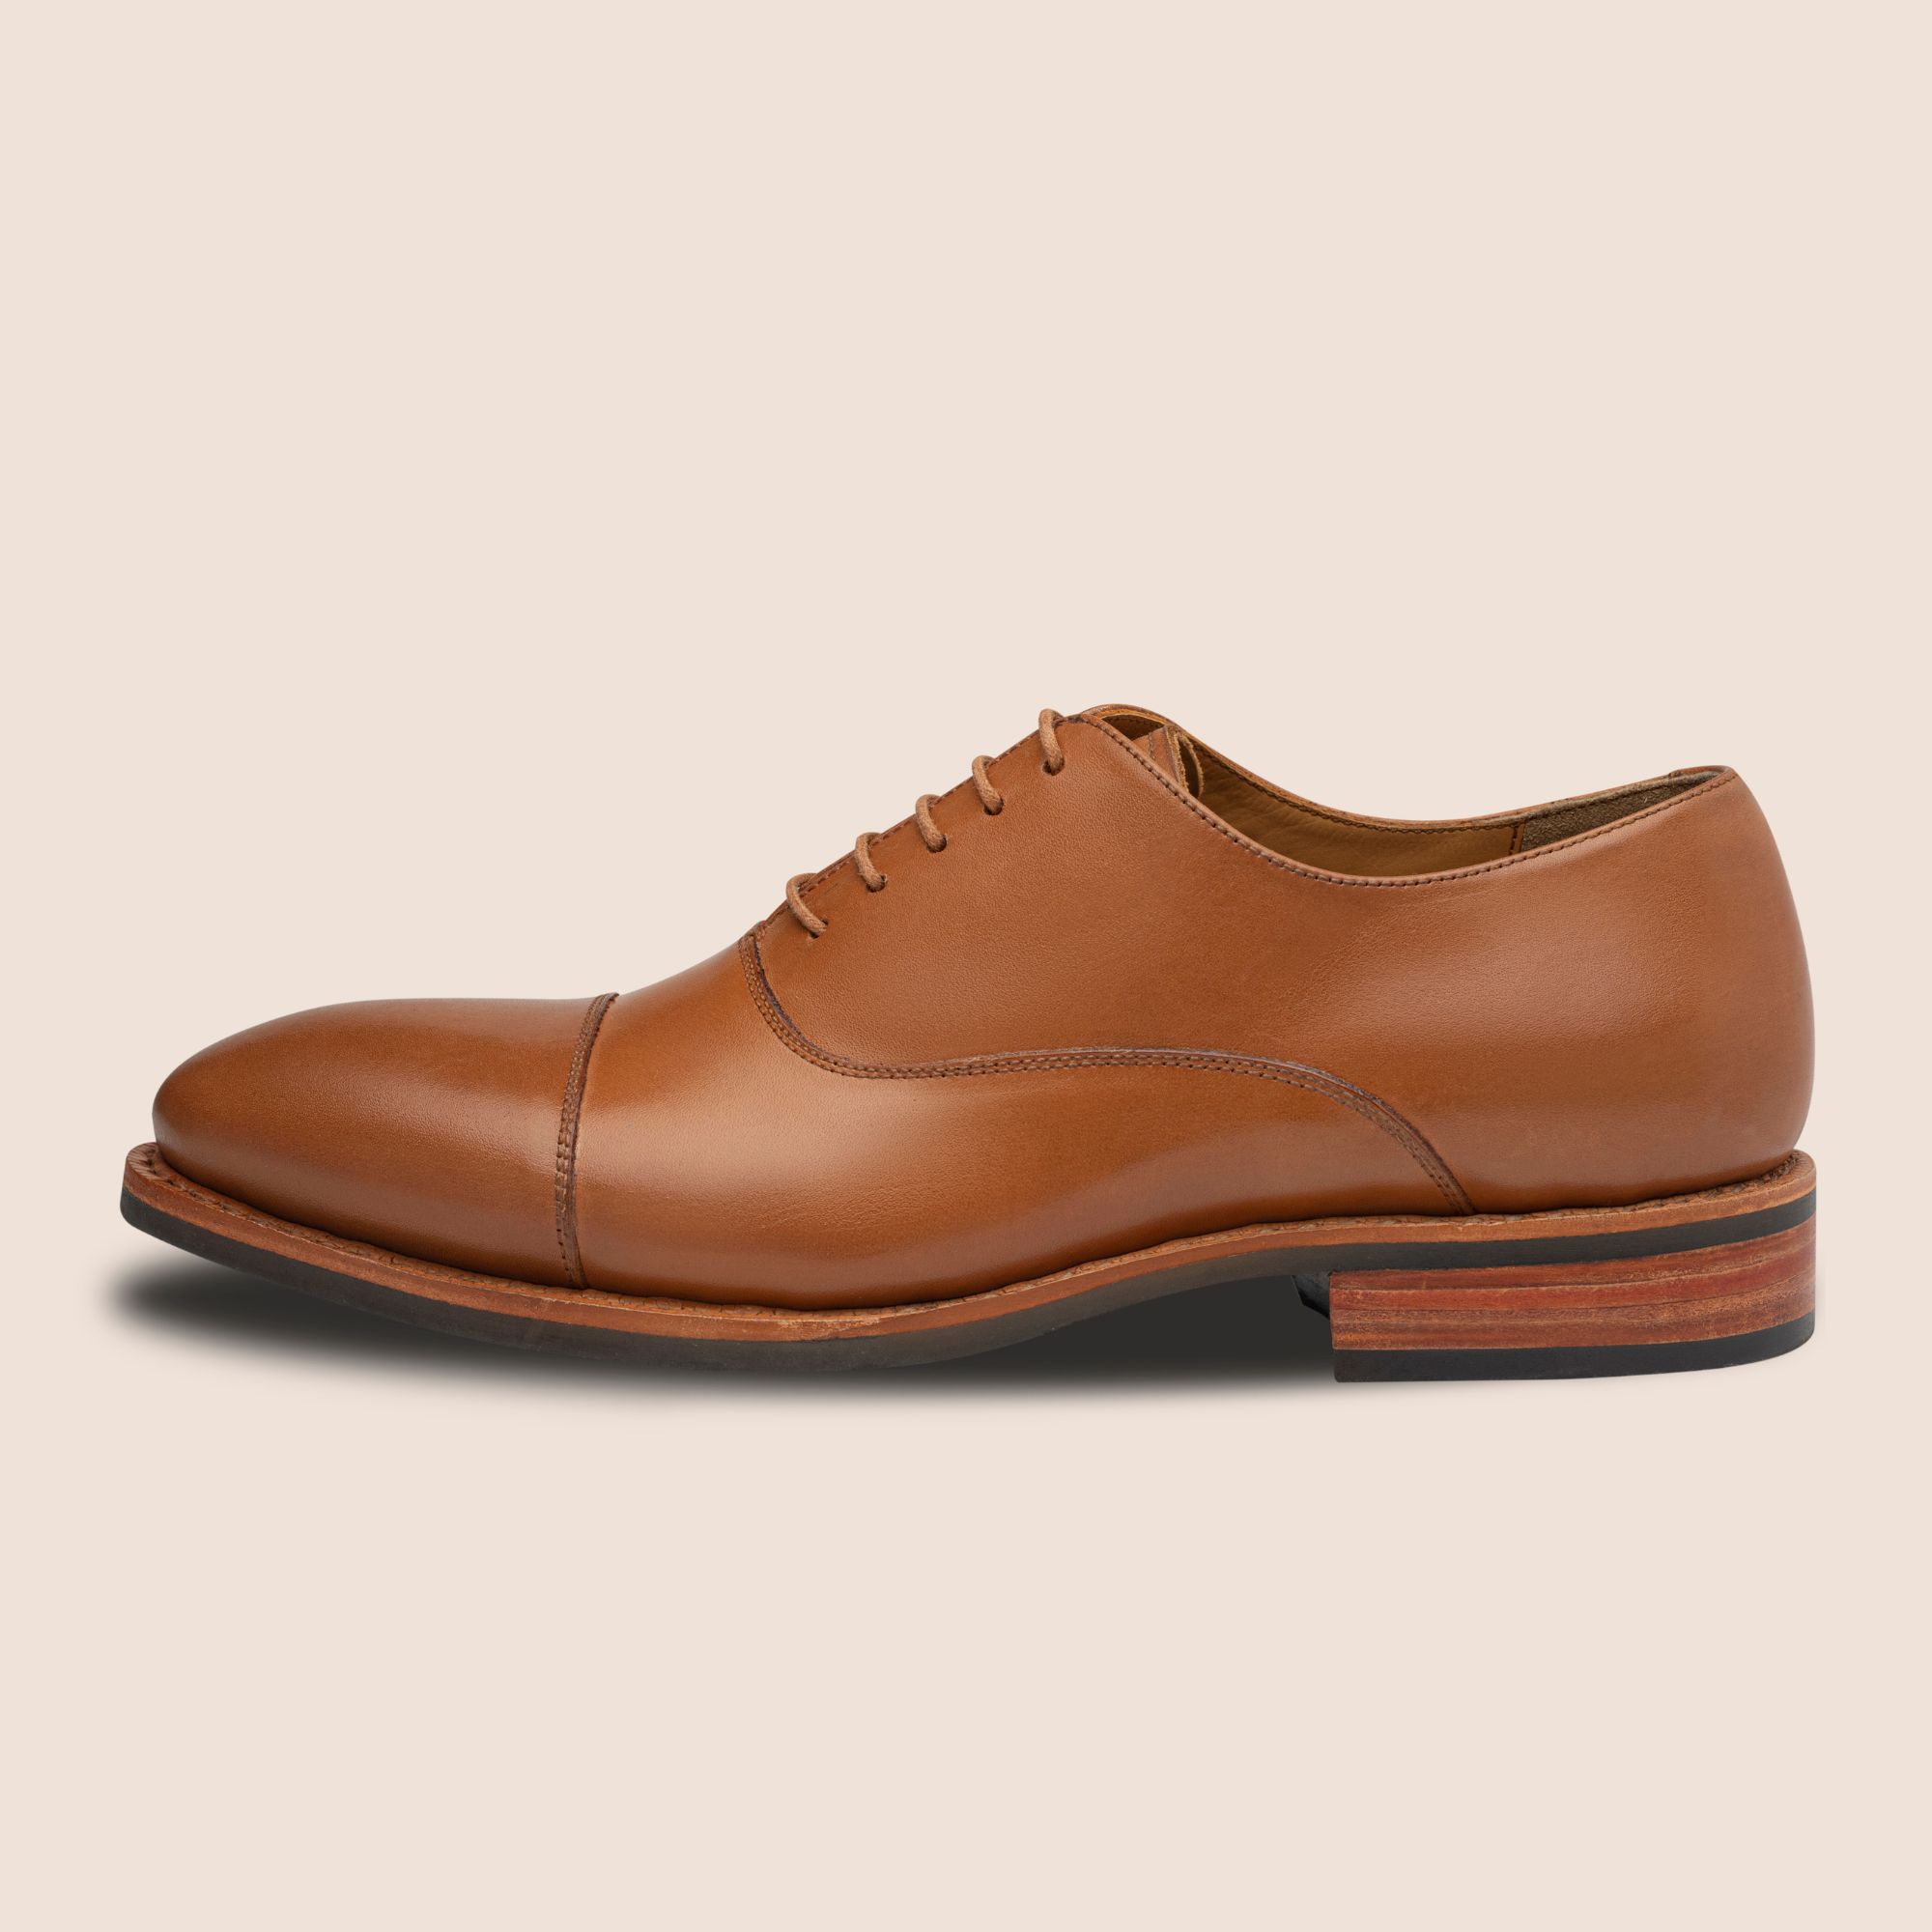 Goodyear Welted tan leather captoe oxfords for men